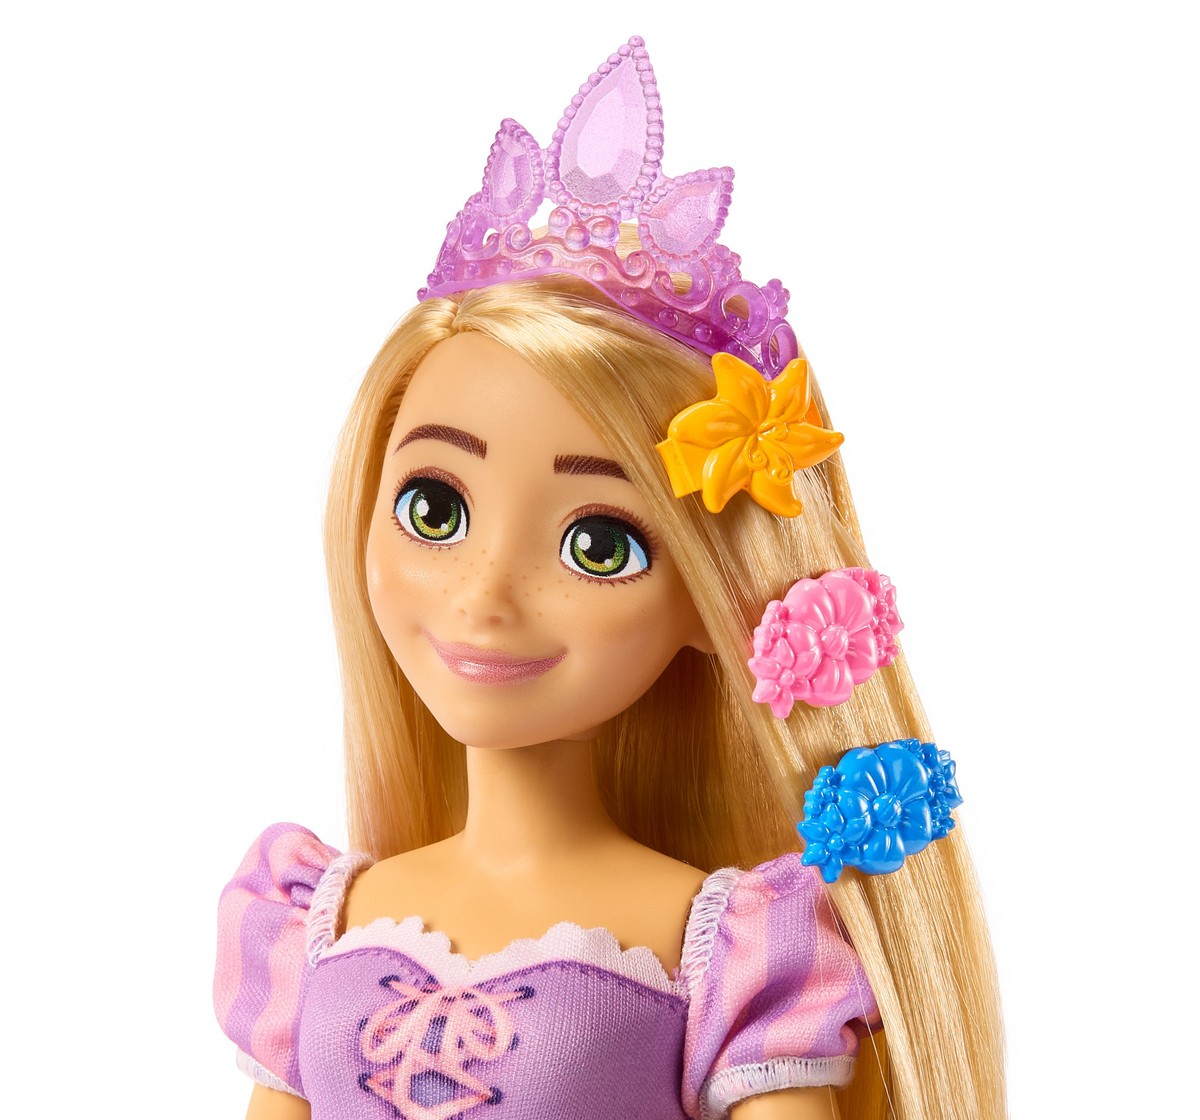 Disney Princess Toys, Rapunzel and Flynn Rider Dolls with Pascal Figure and 9 Hair-Styling Pieces, Inspired by The Movie, Kids for 3Y+, Multicolour